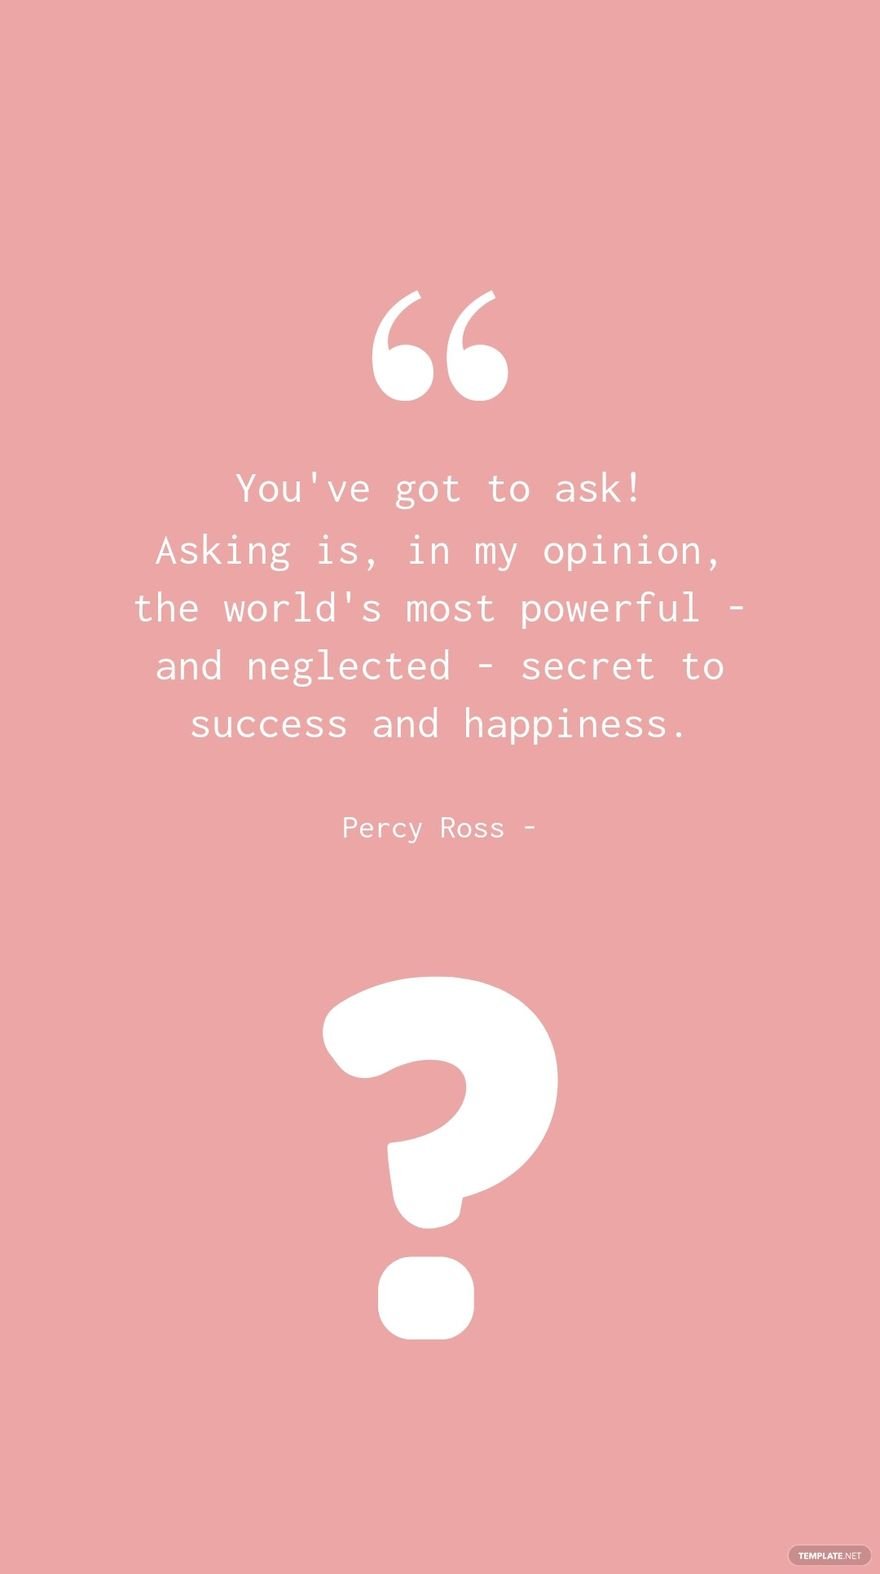 Free Percy Ross - You've got to ask! Asking is, in my opinion, the world's most powerful - and neglected - secret to success and happiness.